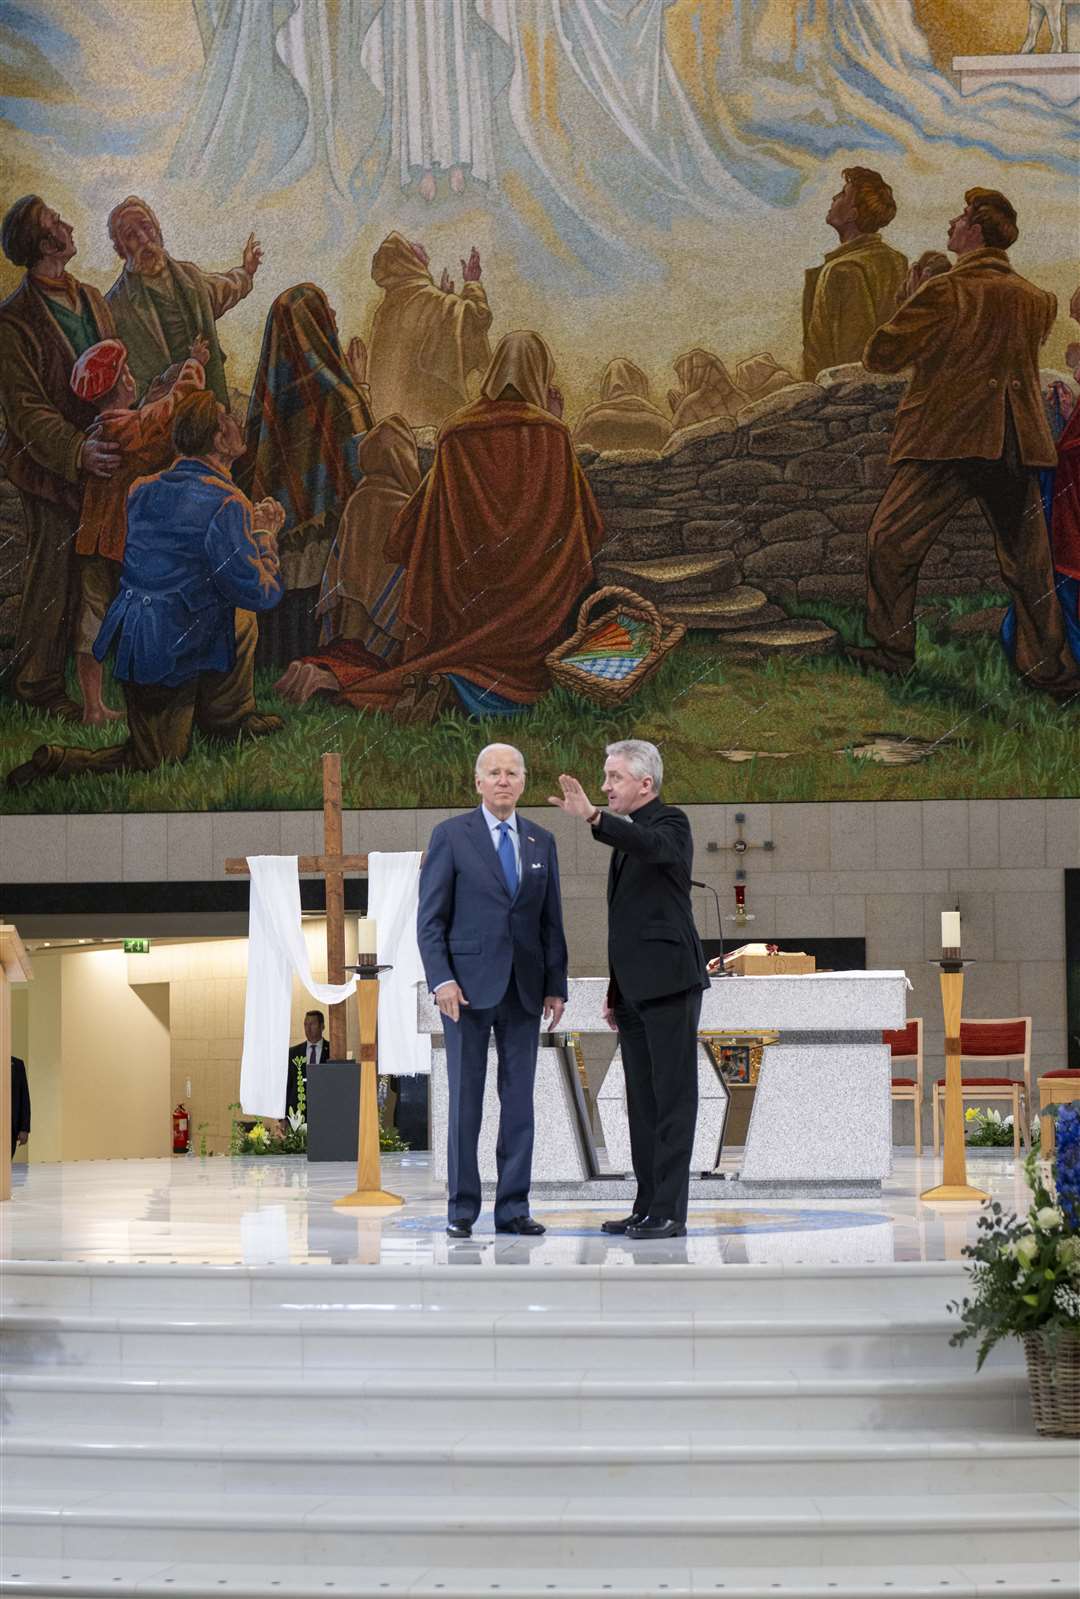 Joe Biden visiting Knock Shrine and Basilica in Mayo with Fr Richard Gibbons (Andrew Downes/Julien Behal Photography)